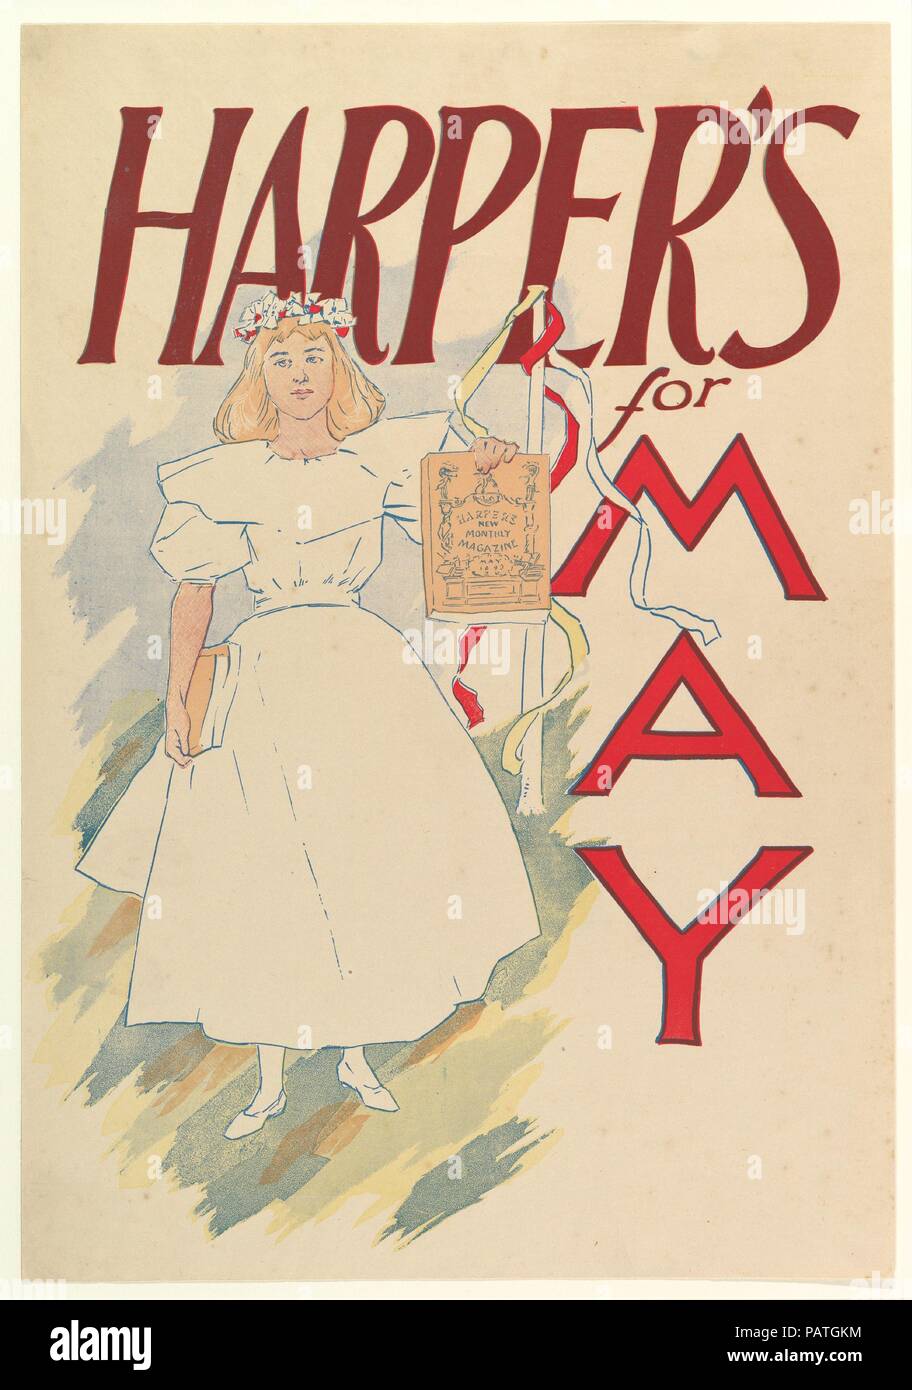 Harper's, May. Artist: Edward Penfield (American, Brooklyn, New York 1866-1925 Beacon, New York). Dimensions: Sheet: 18 3/4 in. × 13 in. (47.7 × 33 cm). Publisher: Harper and Brothers, Publishers. Date: 1893. Museum: Metropolitan Museum of Art, New York, USA. Stock Photo